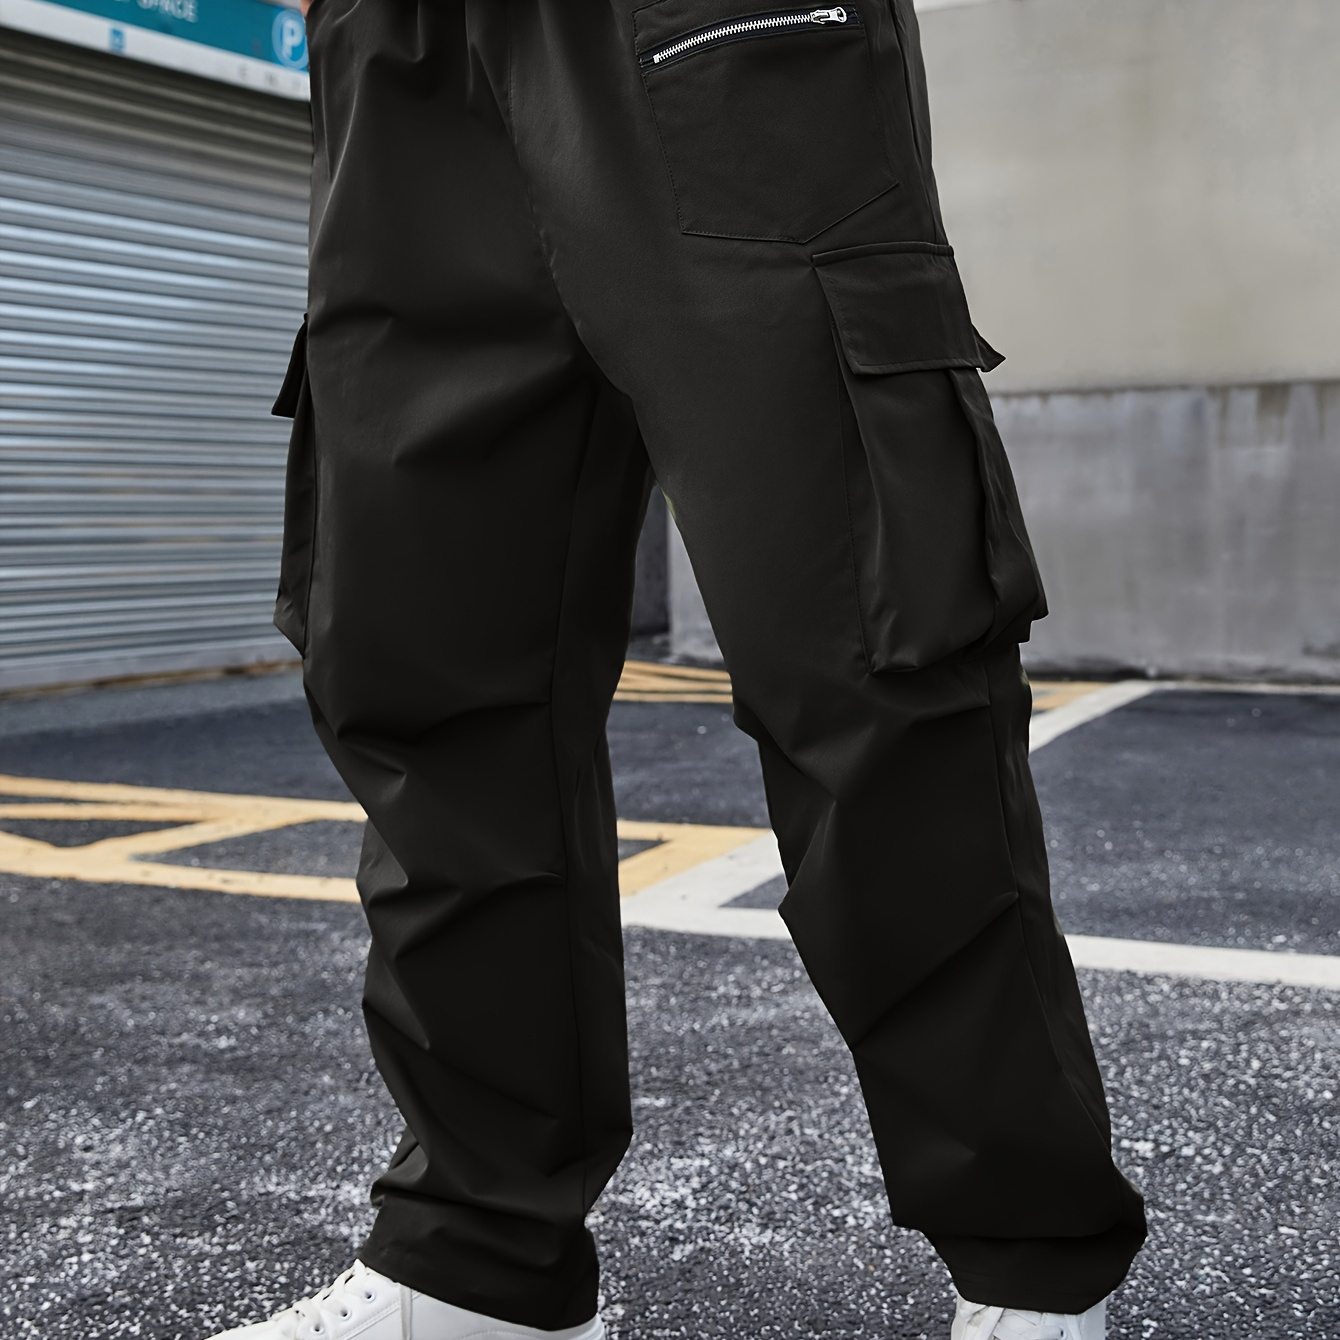 

Men's Plus Size Cargo Pants, Sports & Casual Style, Elastic Waist With Drawstring, Comfortable Wear